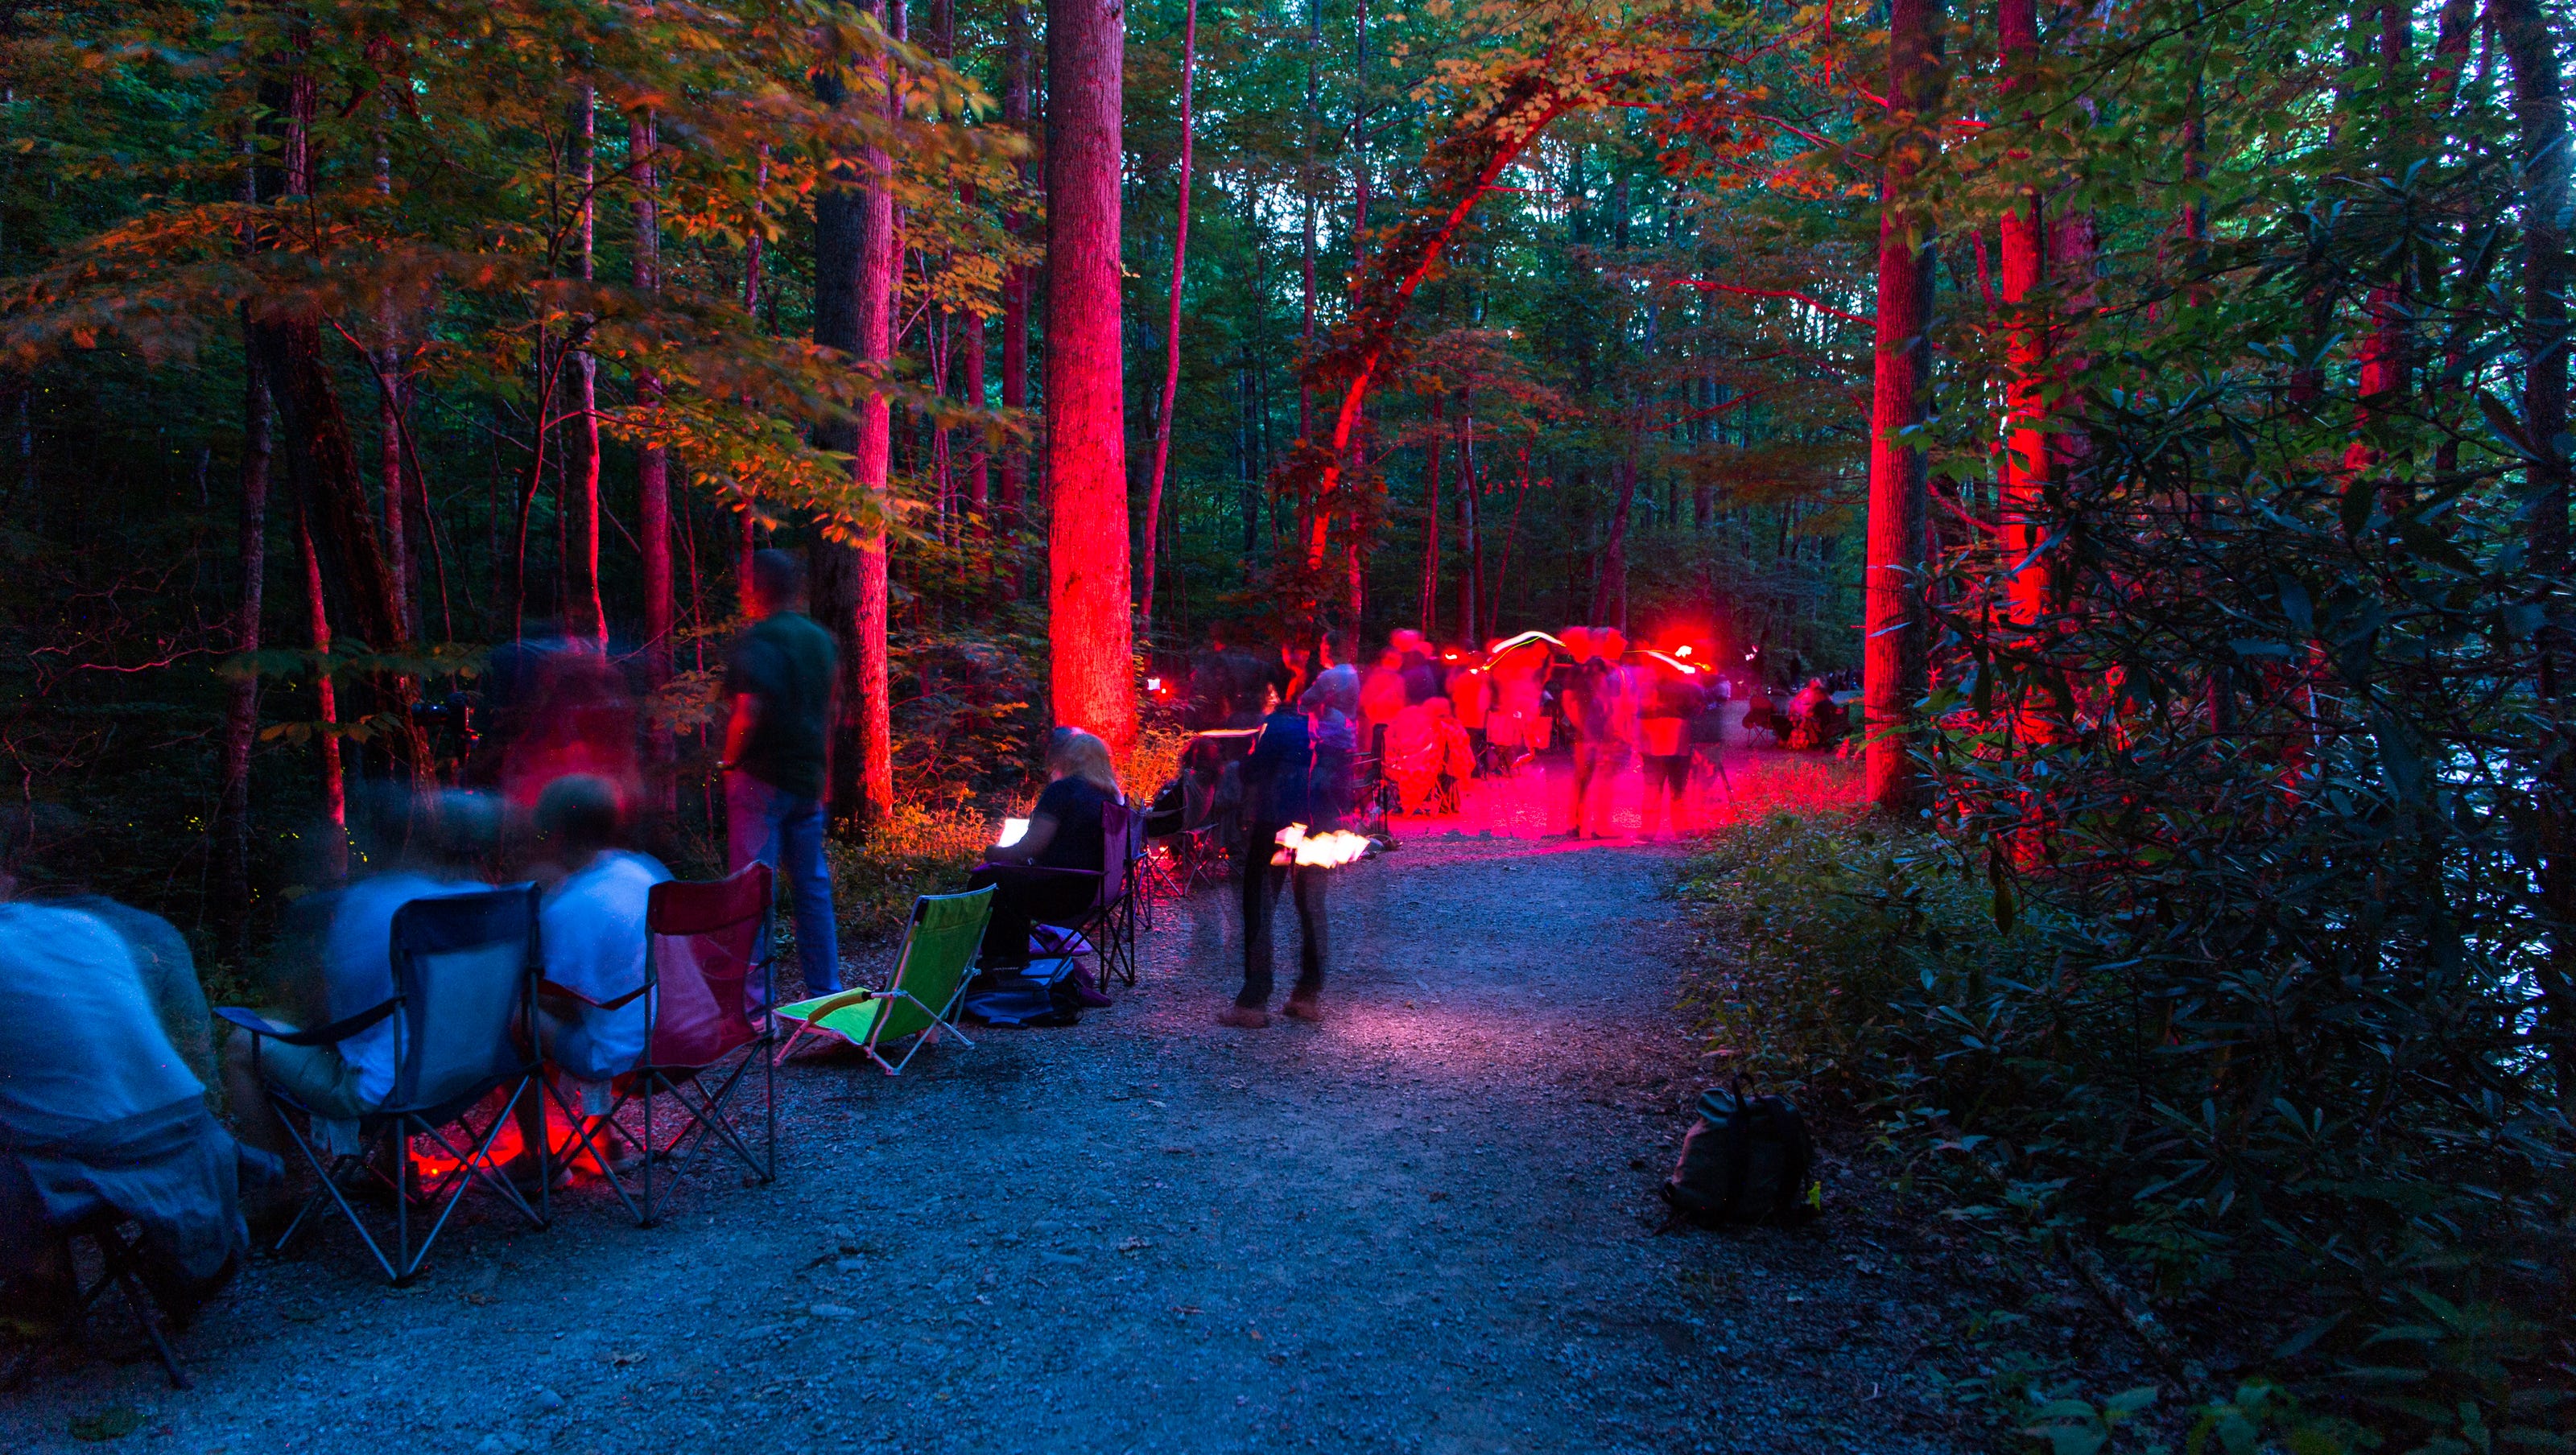 Great Smoky Mountains synchronous firefly viewing dates announced